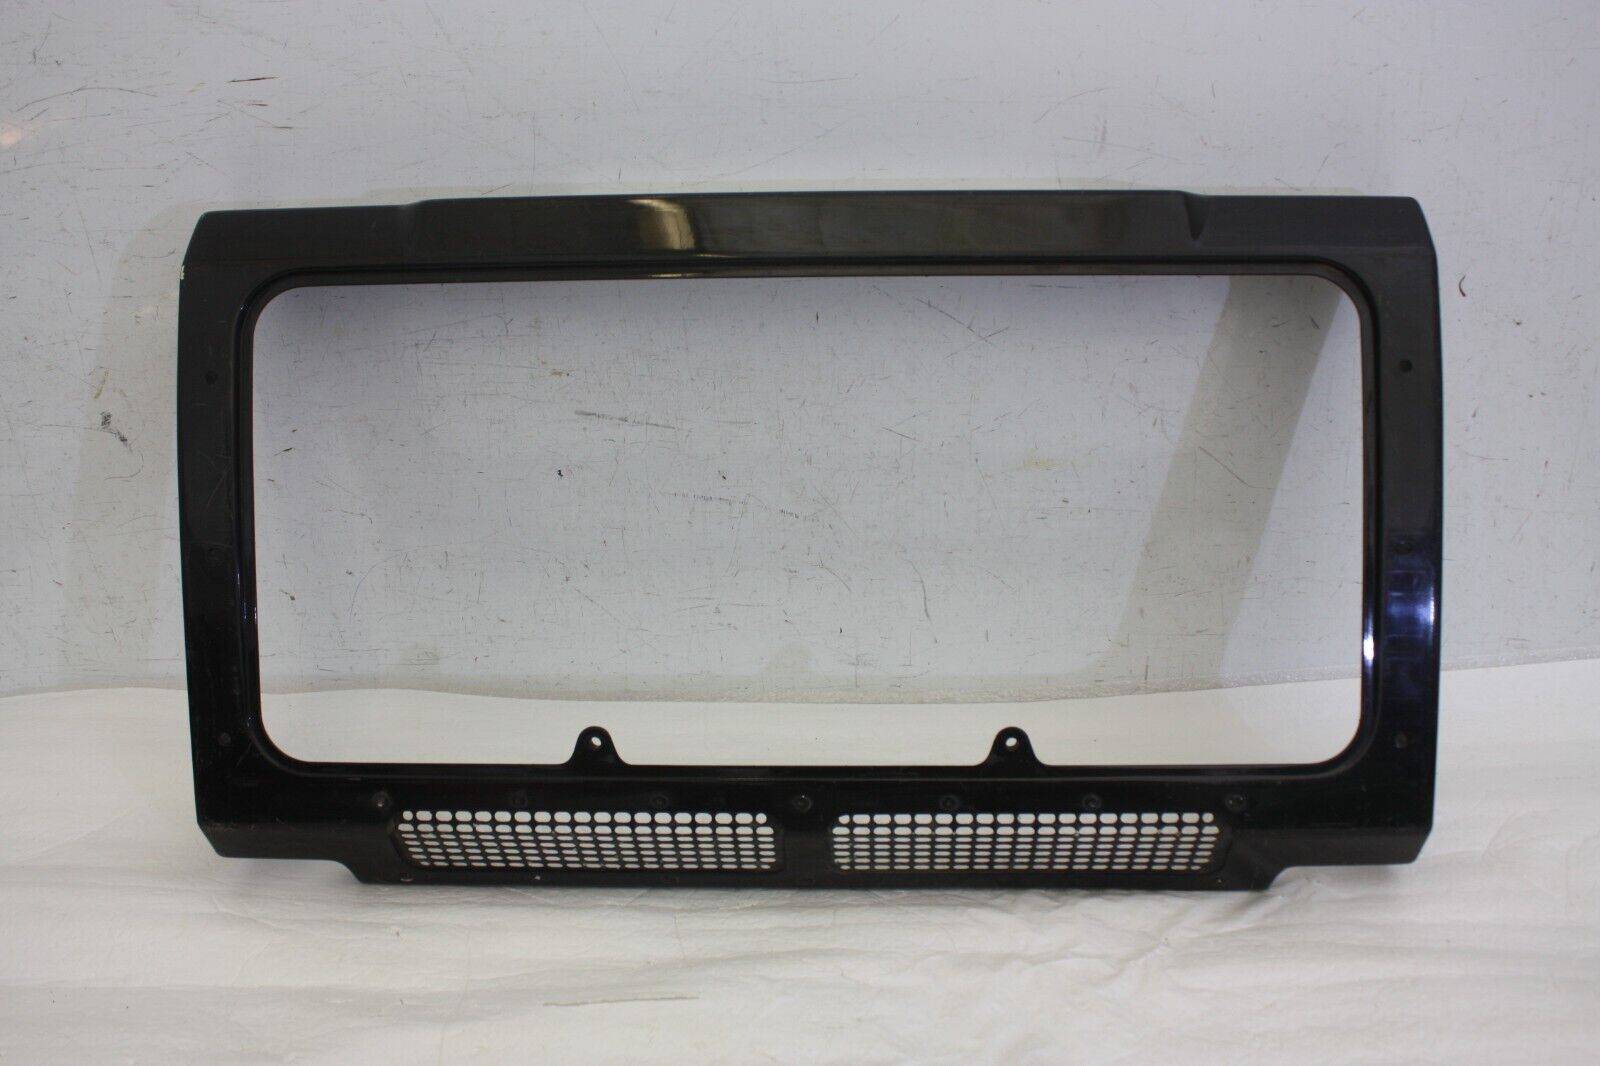 Land Rover Defender Front Bumper Grill Surround XH12 16C706 AA Genuine 176279933542